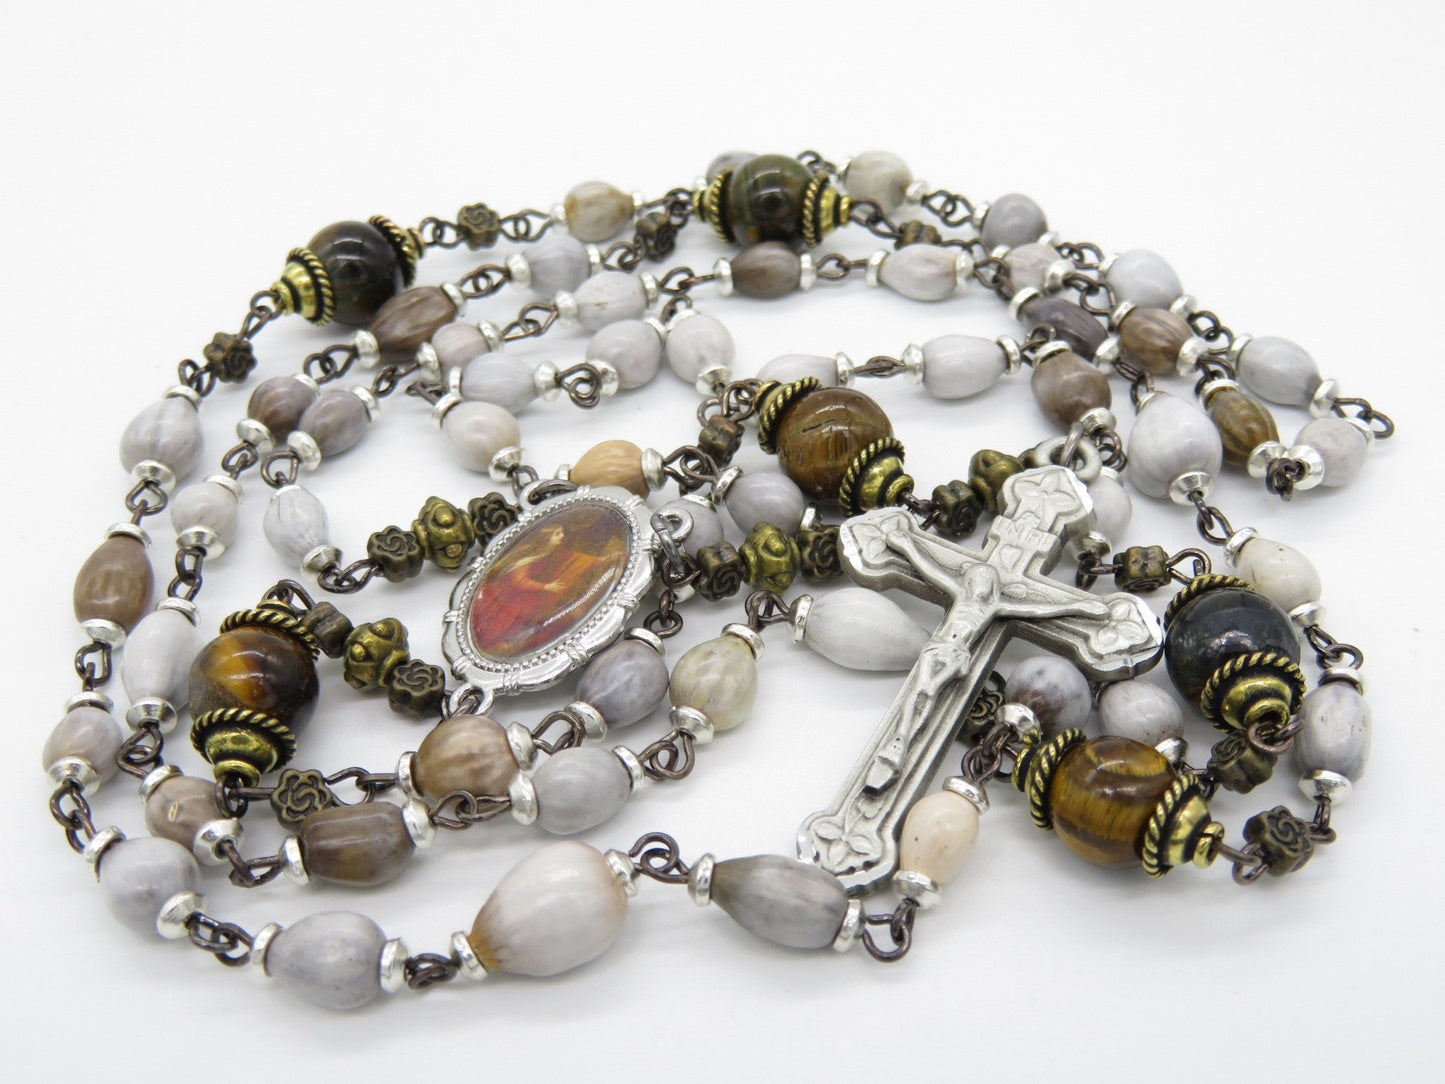 Saint Mary Magdalene Handcrafted Job's tear's Rosary beads, Tigers eye Gemstone Rosaries, Pewter Crucifix, Prayer beads,